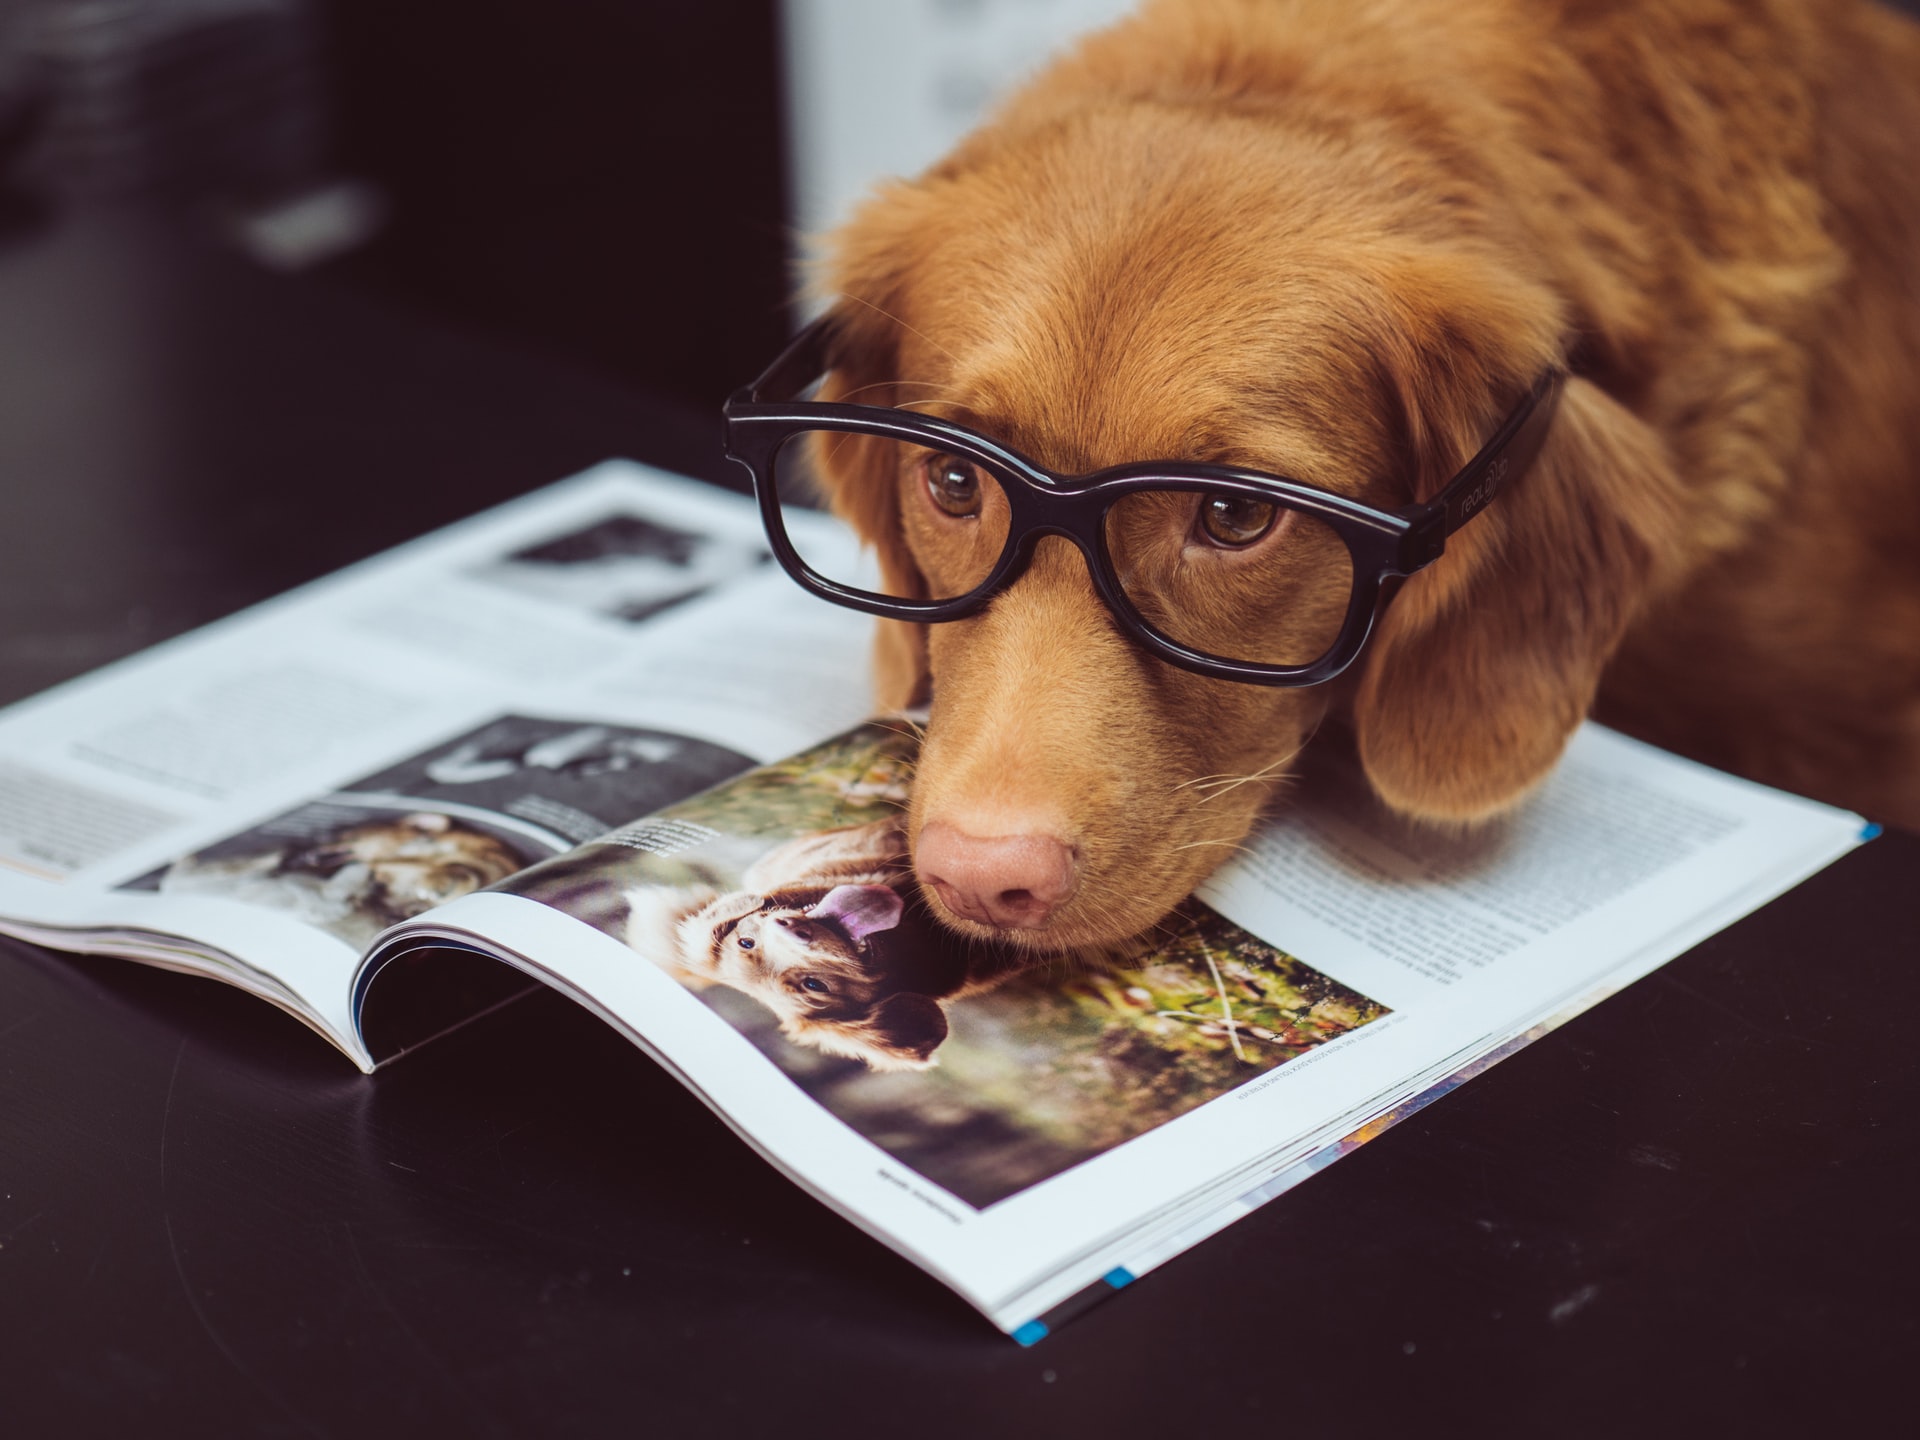 A retriever puppy wearing black glasses with its head on a dog magazine